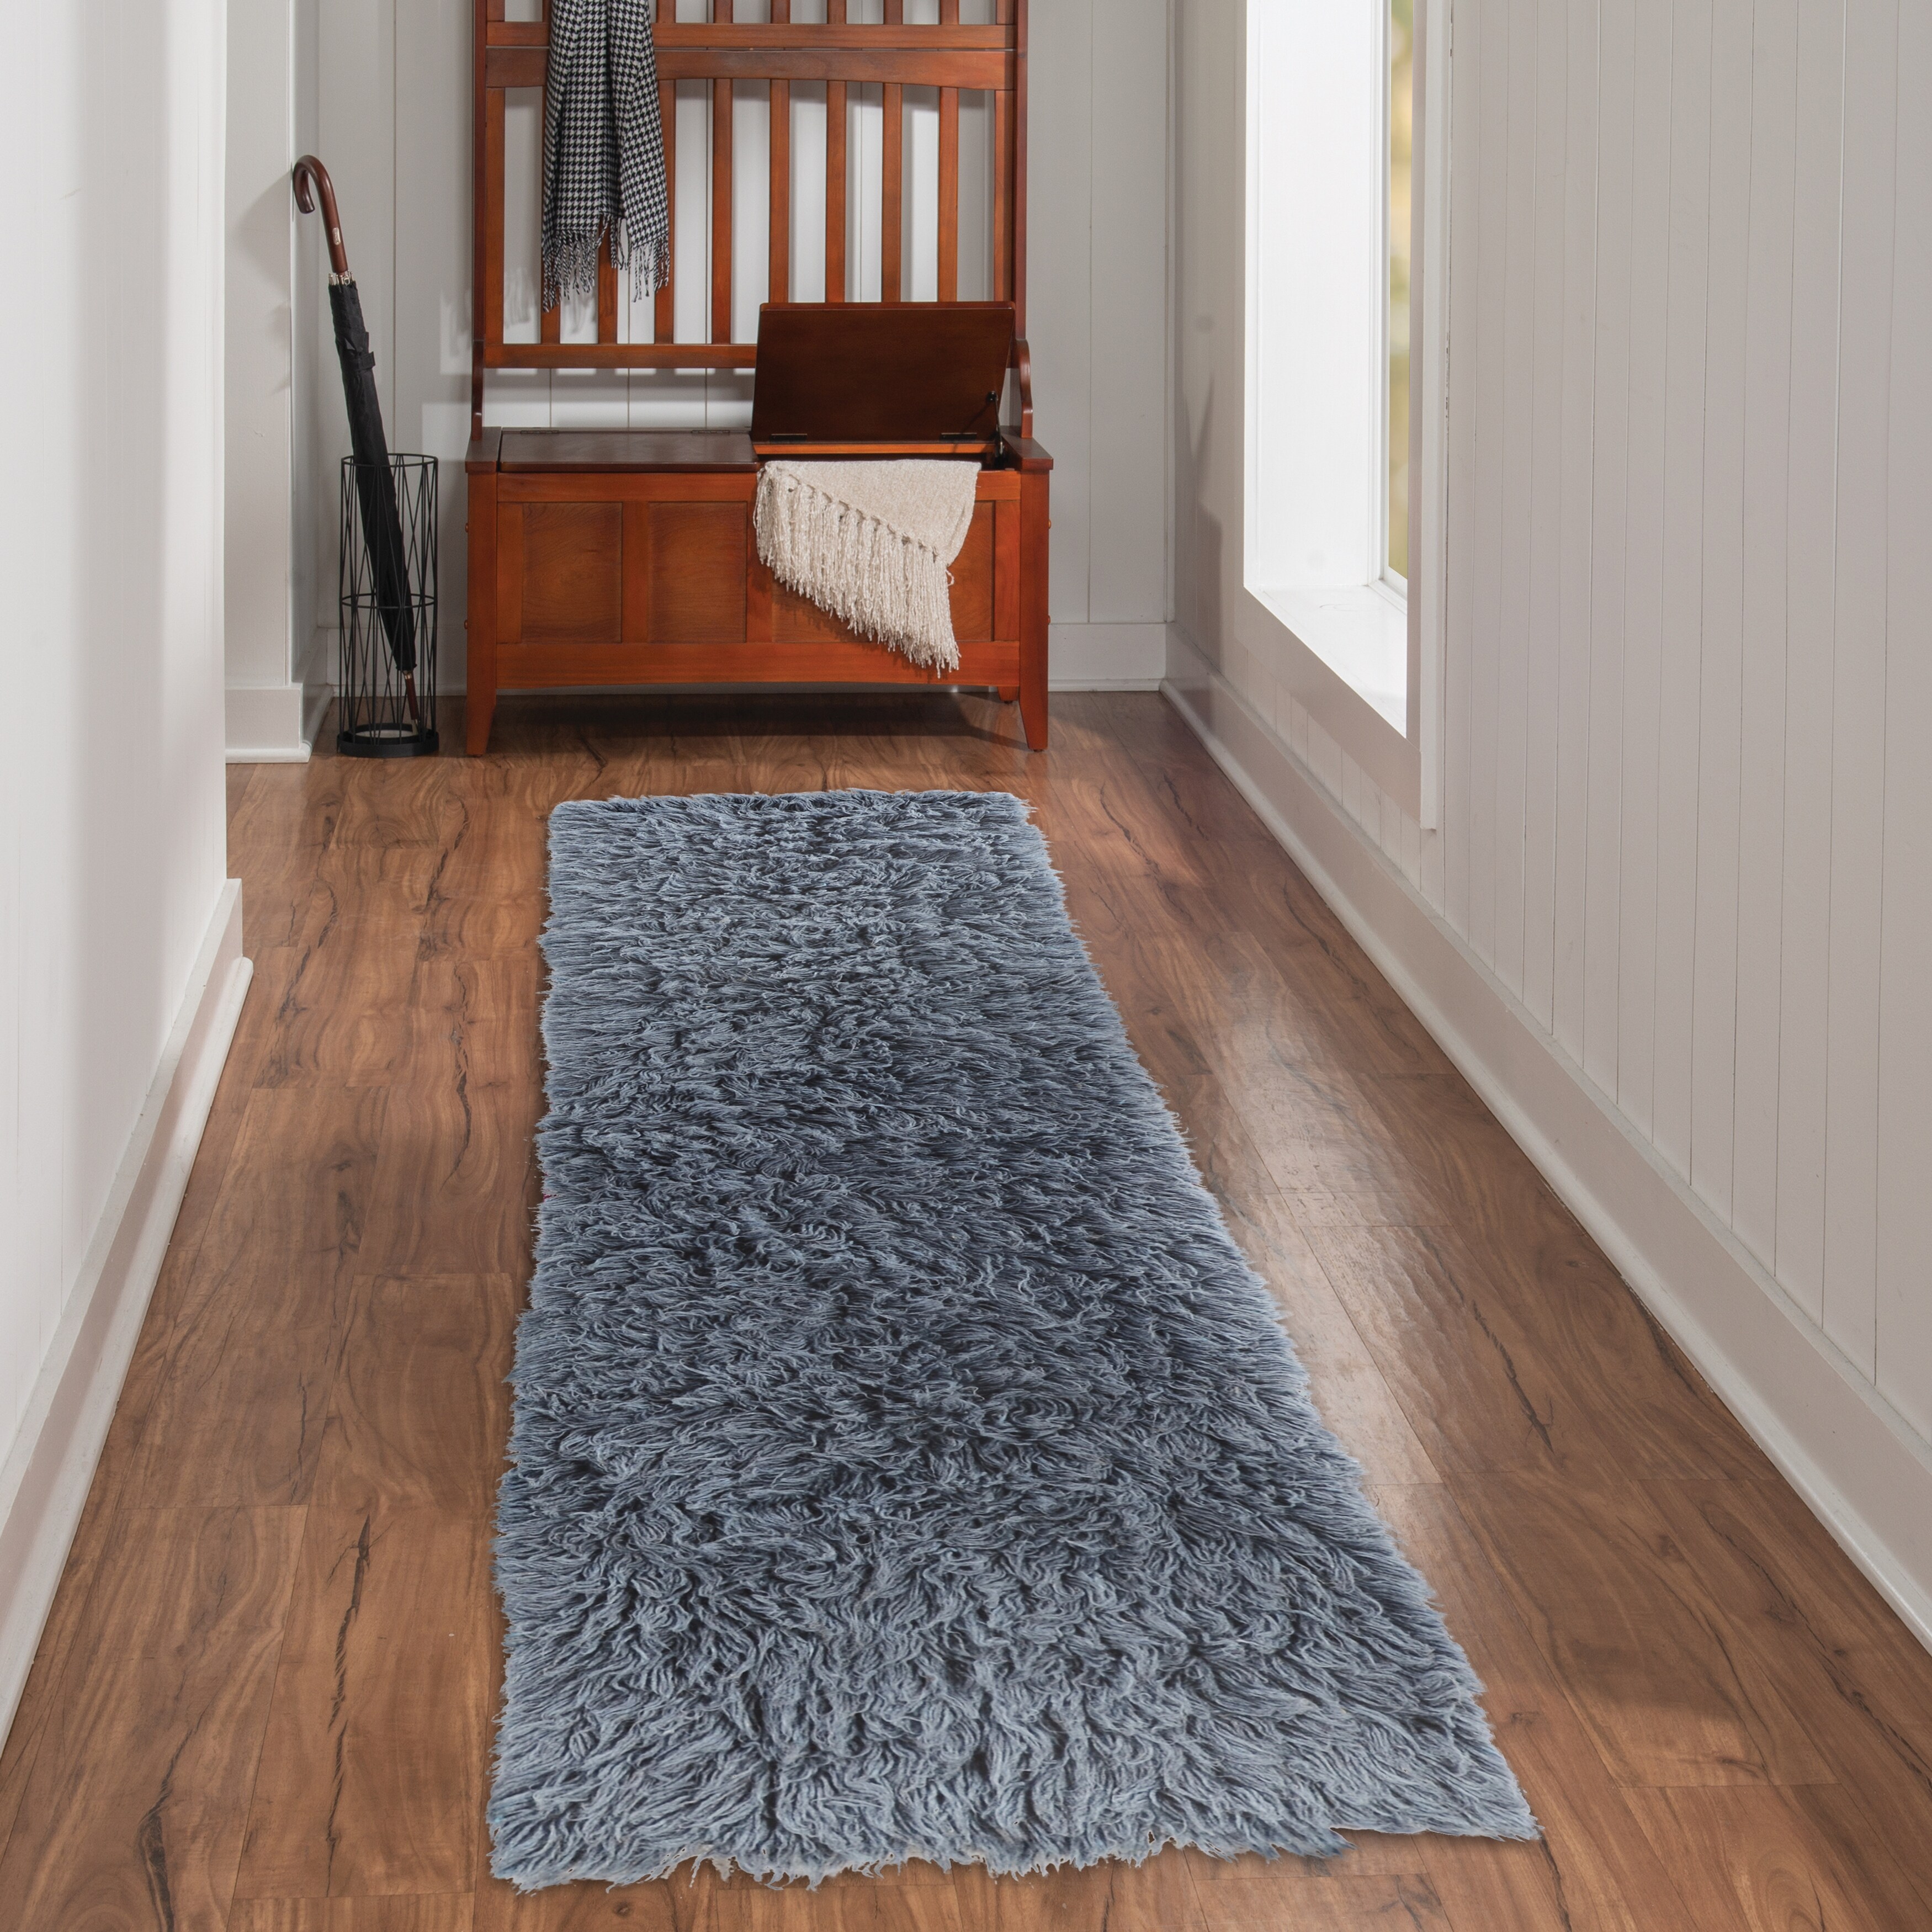 Buy Flokati Area Rugs Online at Overstock | Our Best Rugs Deals